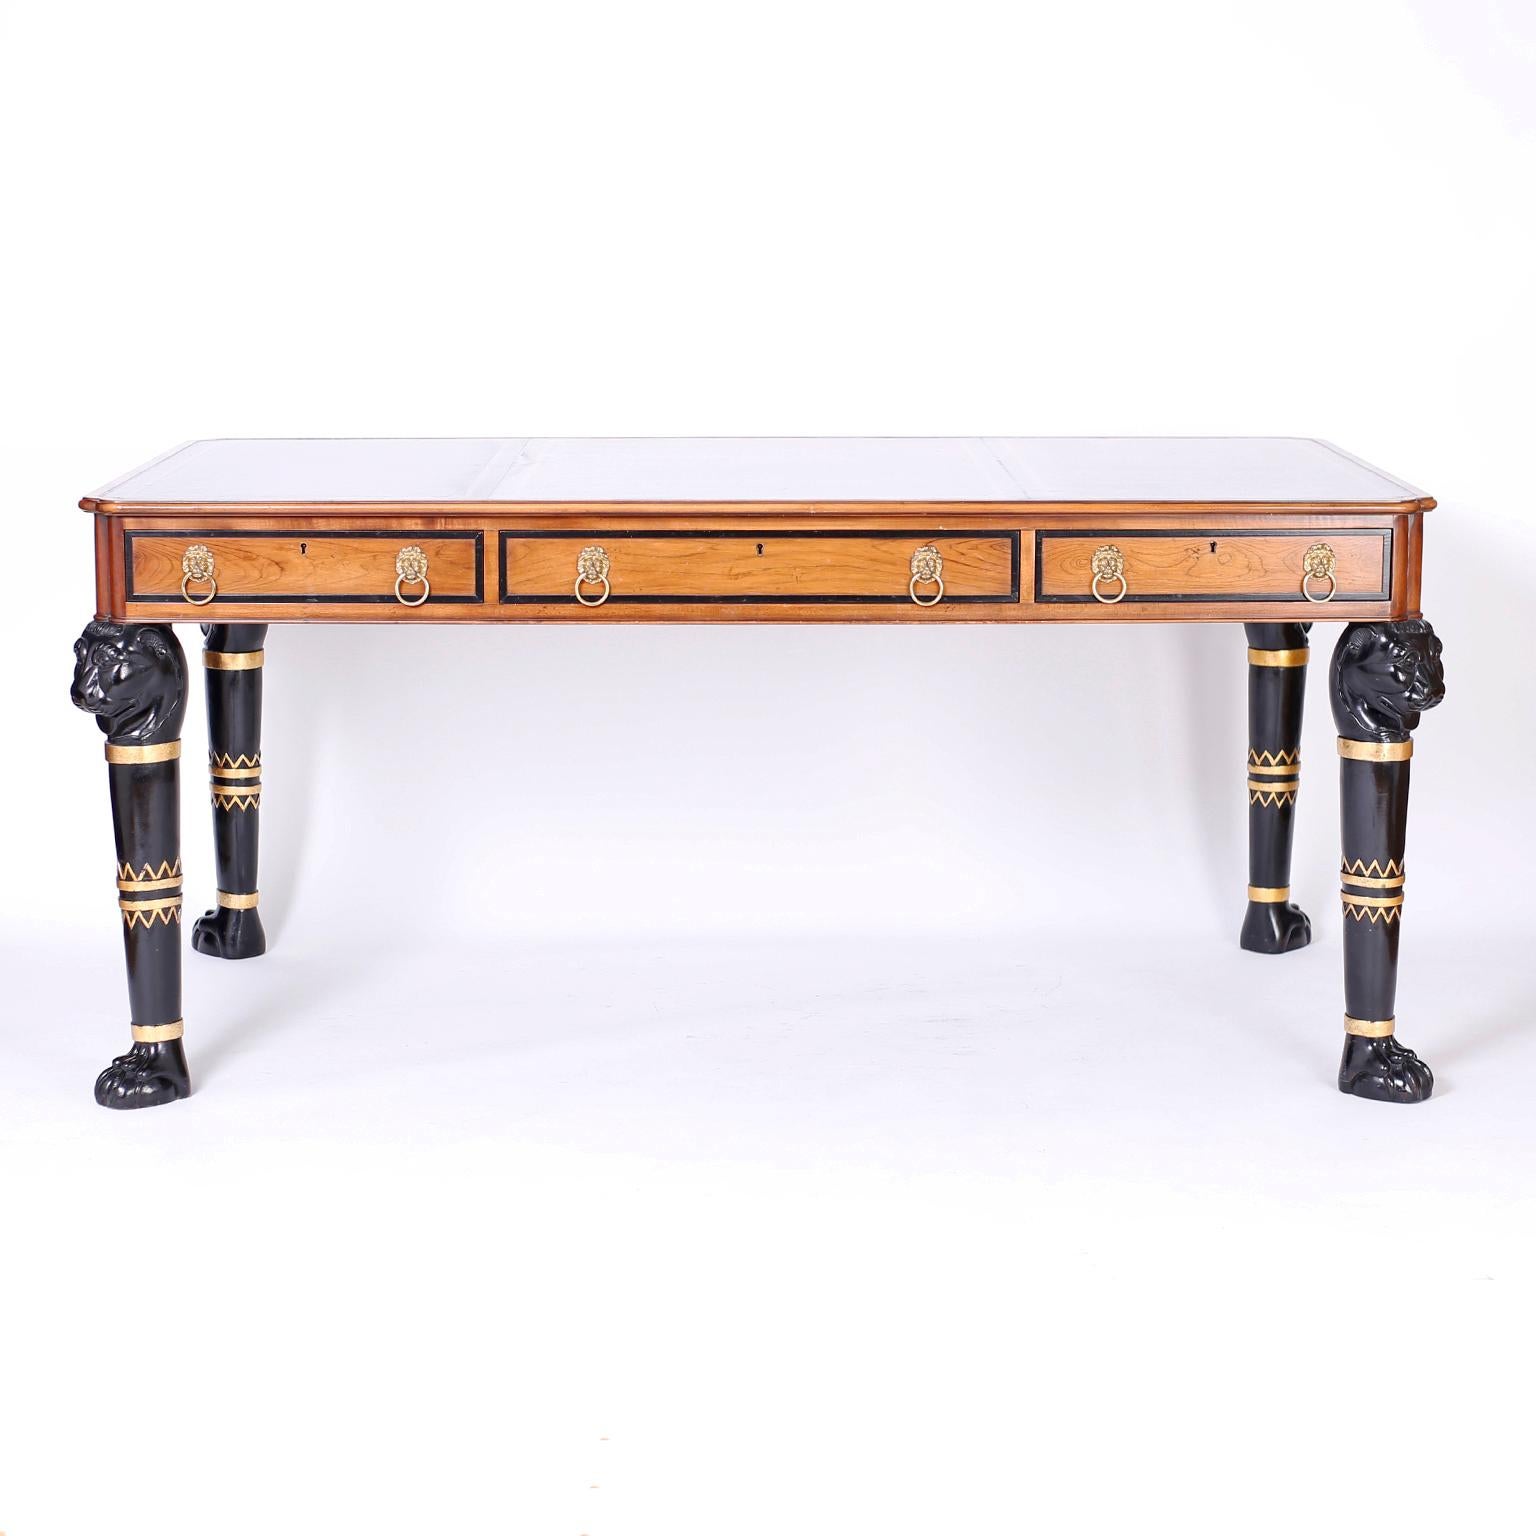 Egyptian revival or neoclassical desk or writing table crafted in walnut with three tooled leather panels on the top, three paneled drawers in front with brass lion head pulls and four ebonized legs decorated with distinctive Egyptian designs in